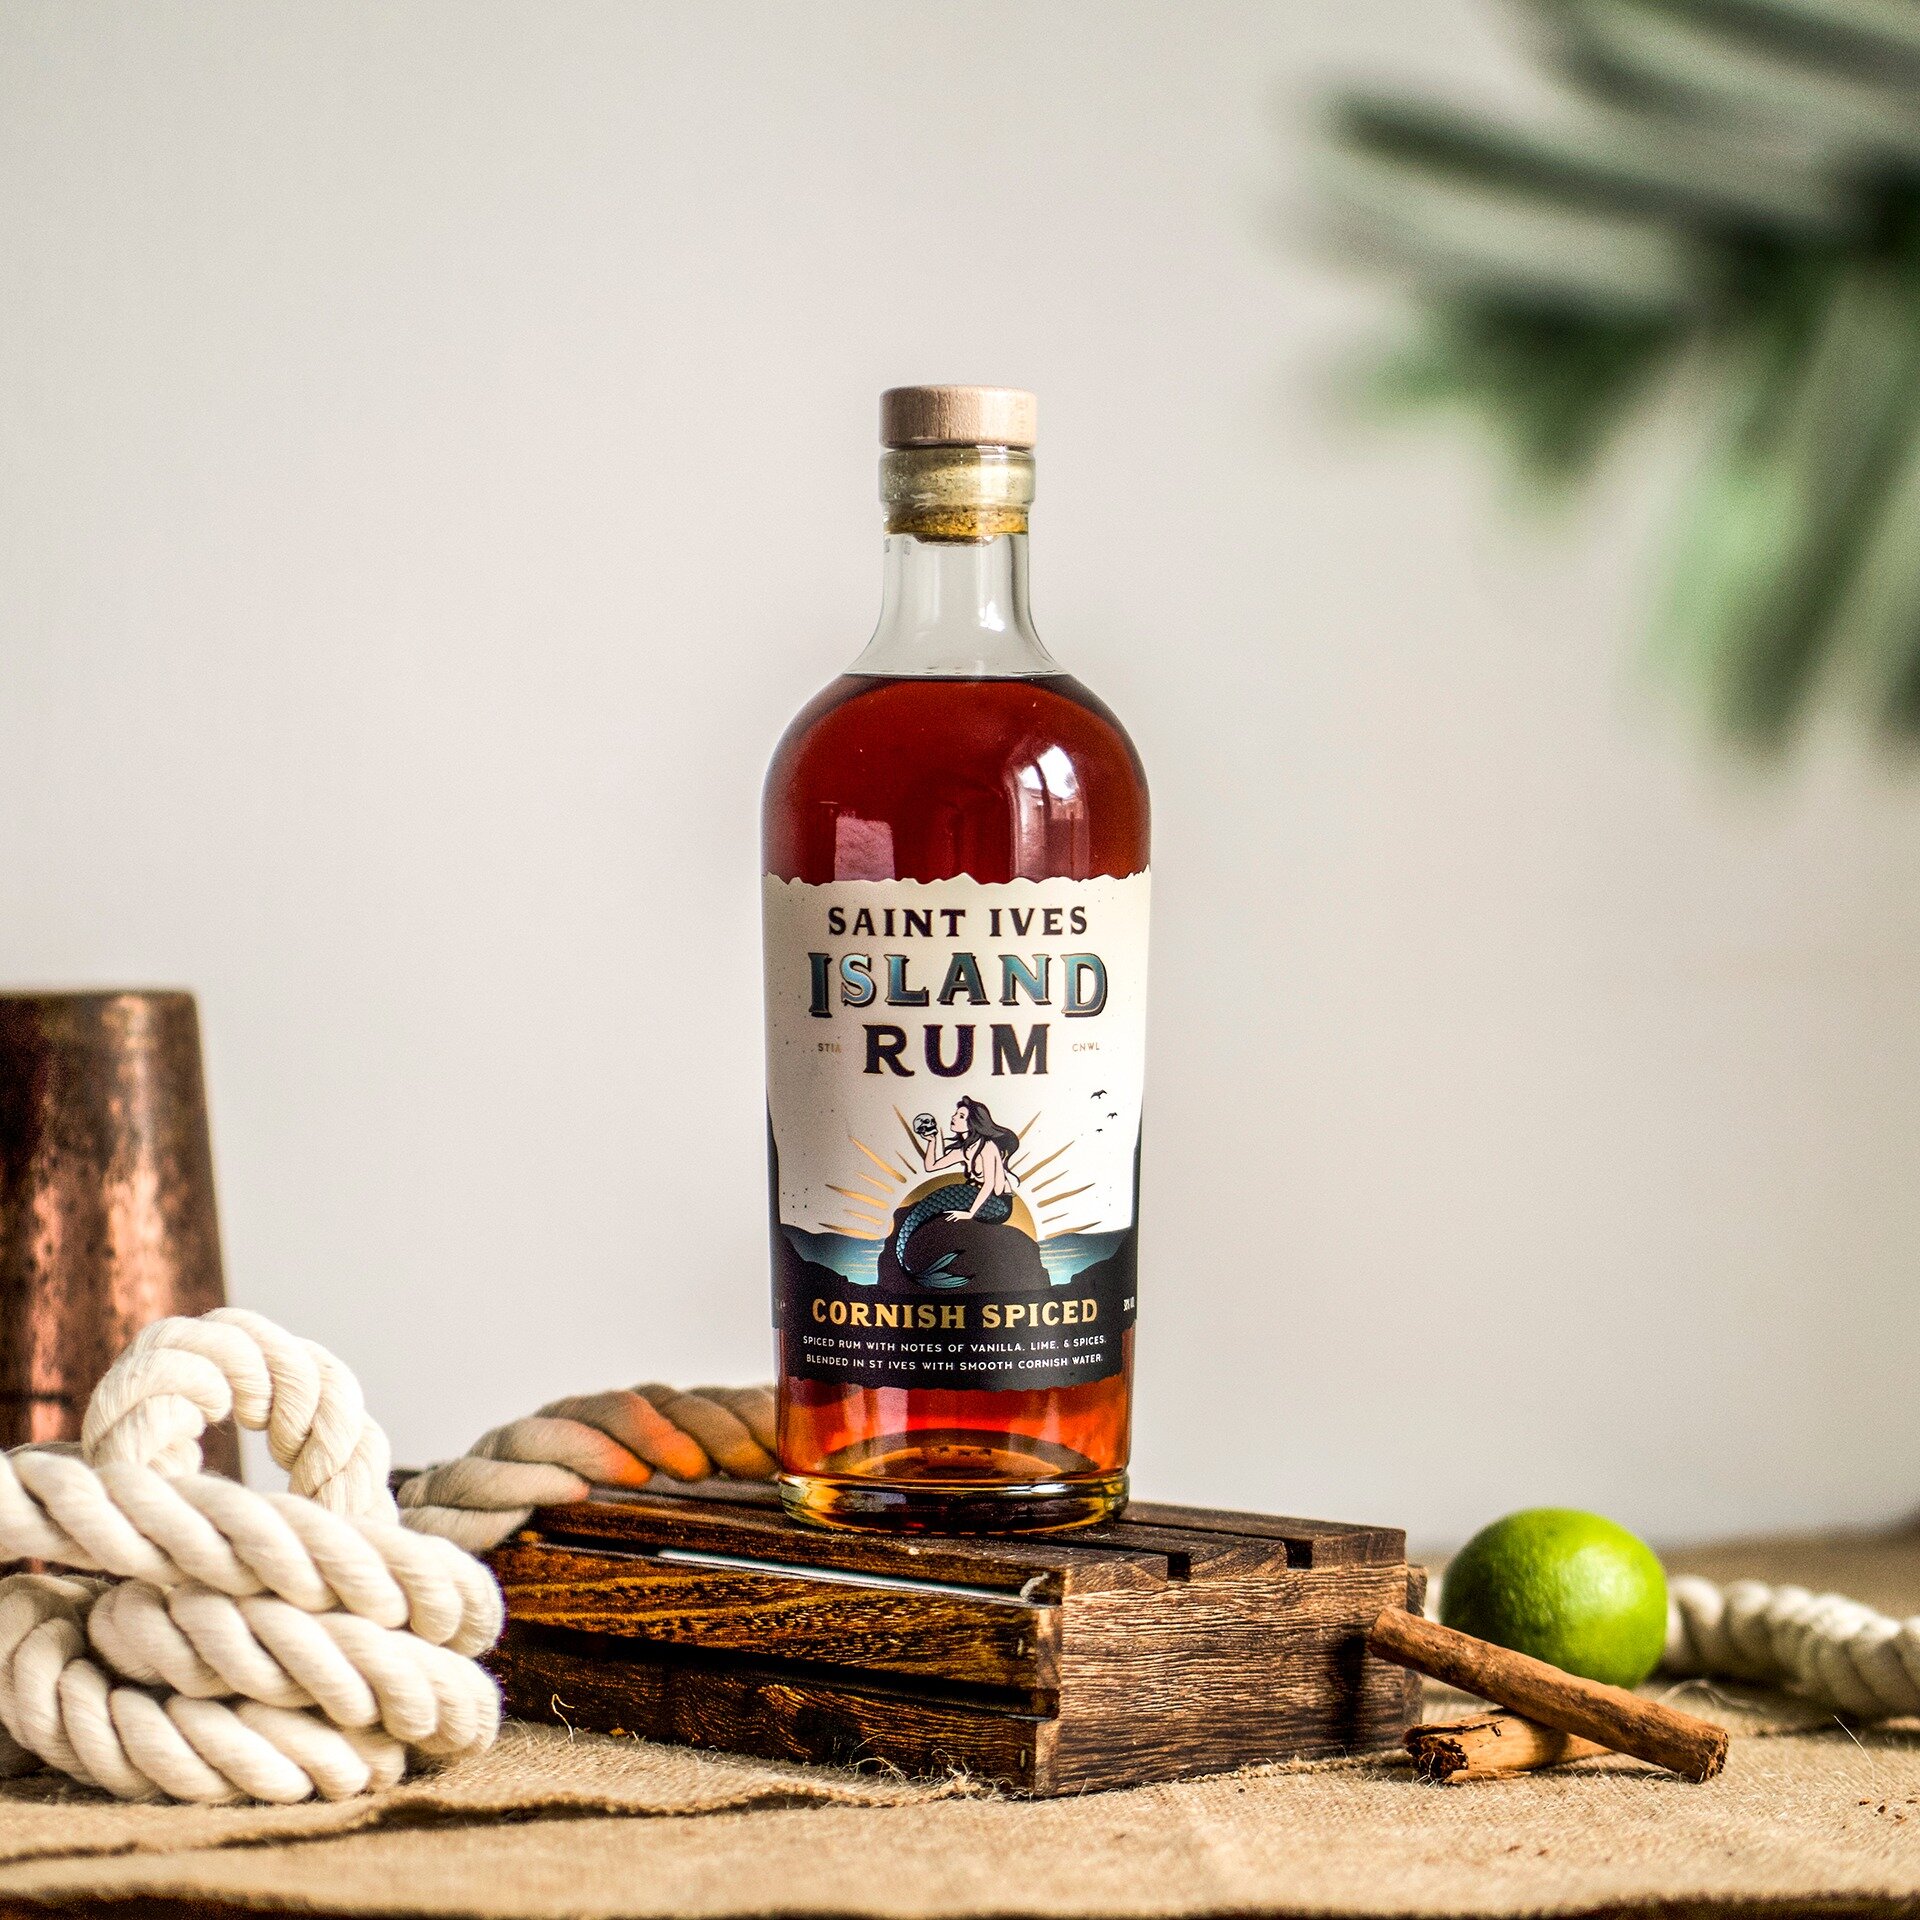 Saint Ives Island Rum is crafted, spiced, and bottled in the heart of St Ives. This Cornish Spiced expression boasts sweet vanilla, zesty lime, and a subtle warmth of cinnamon and nutmeg. You&rsquo;ll see this delicious rum in an abundance of cocktai